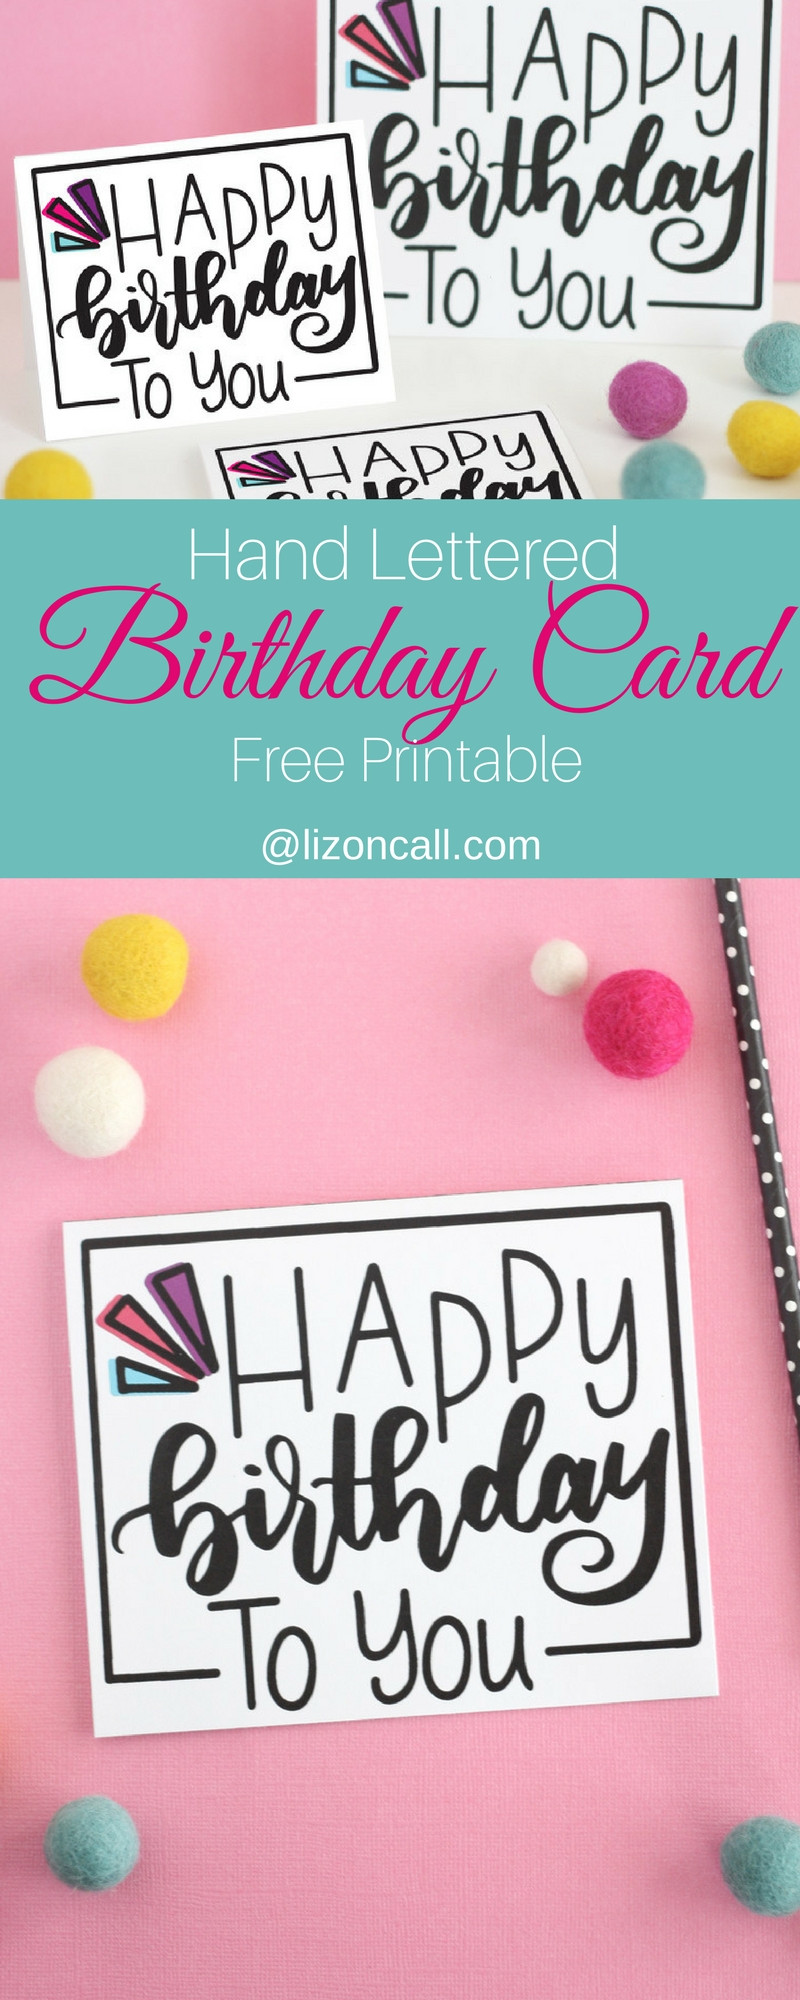 Printable Birthday Cards
 Hand Lettered Free Printable Birthday Card Liz on Call